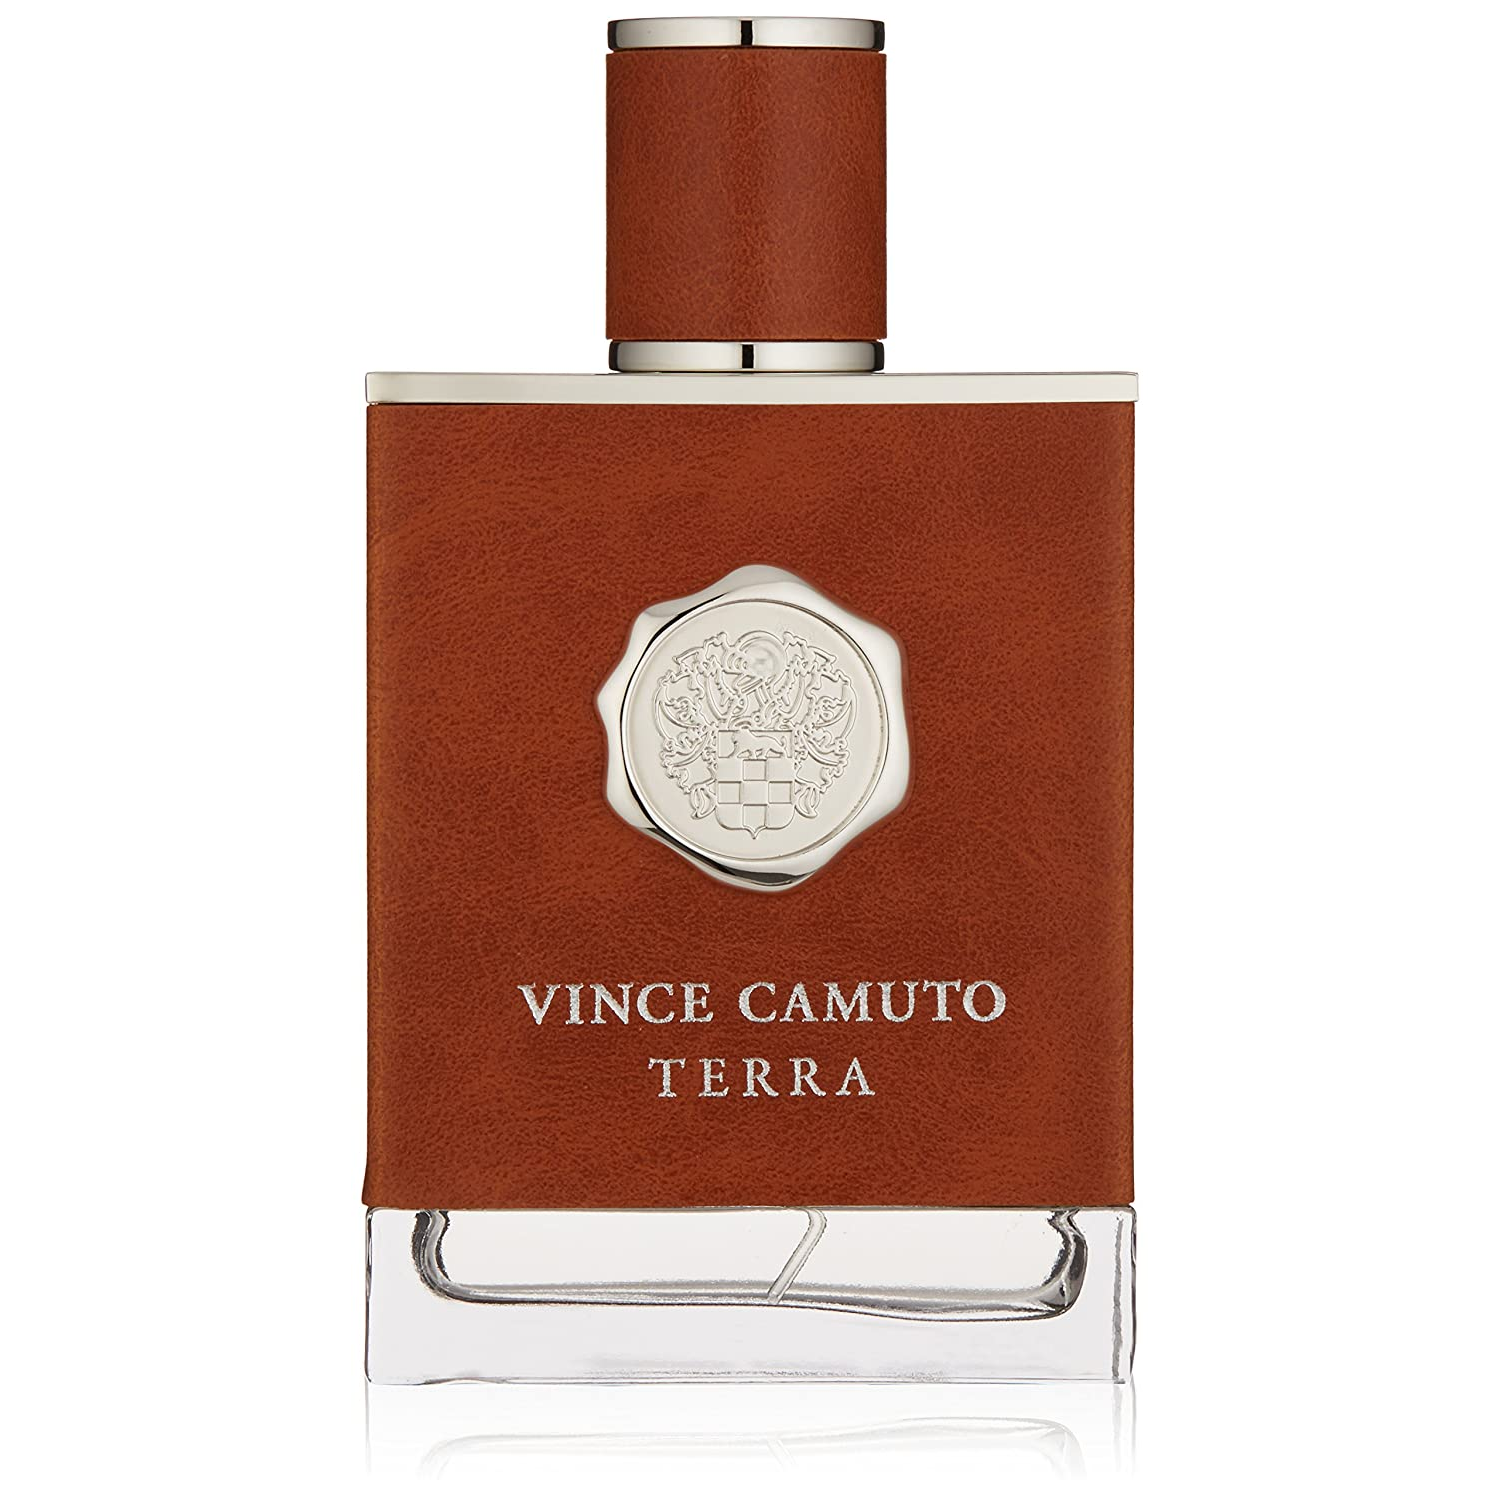 Vince Camuto Homme (BLUE) M 100ml Boxed